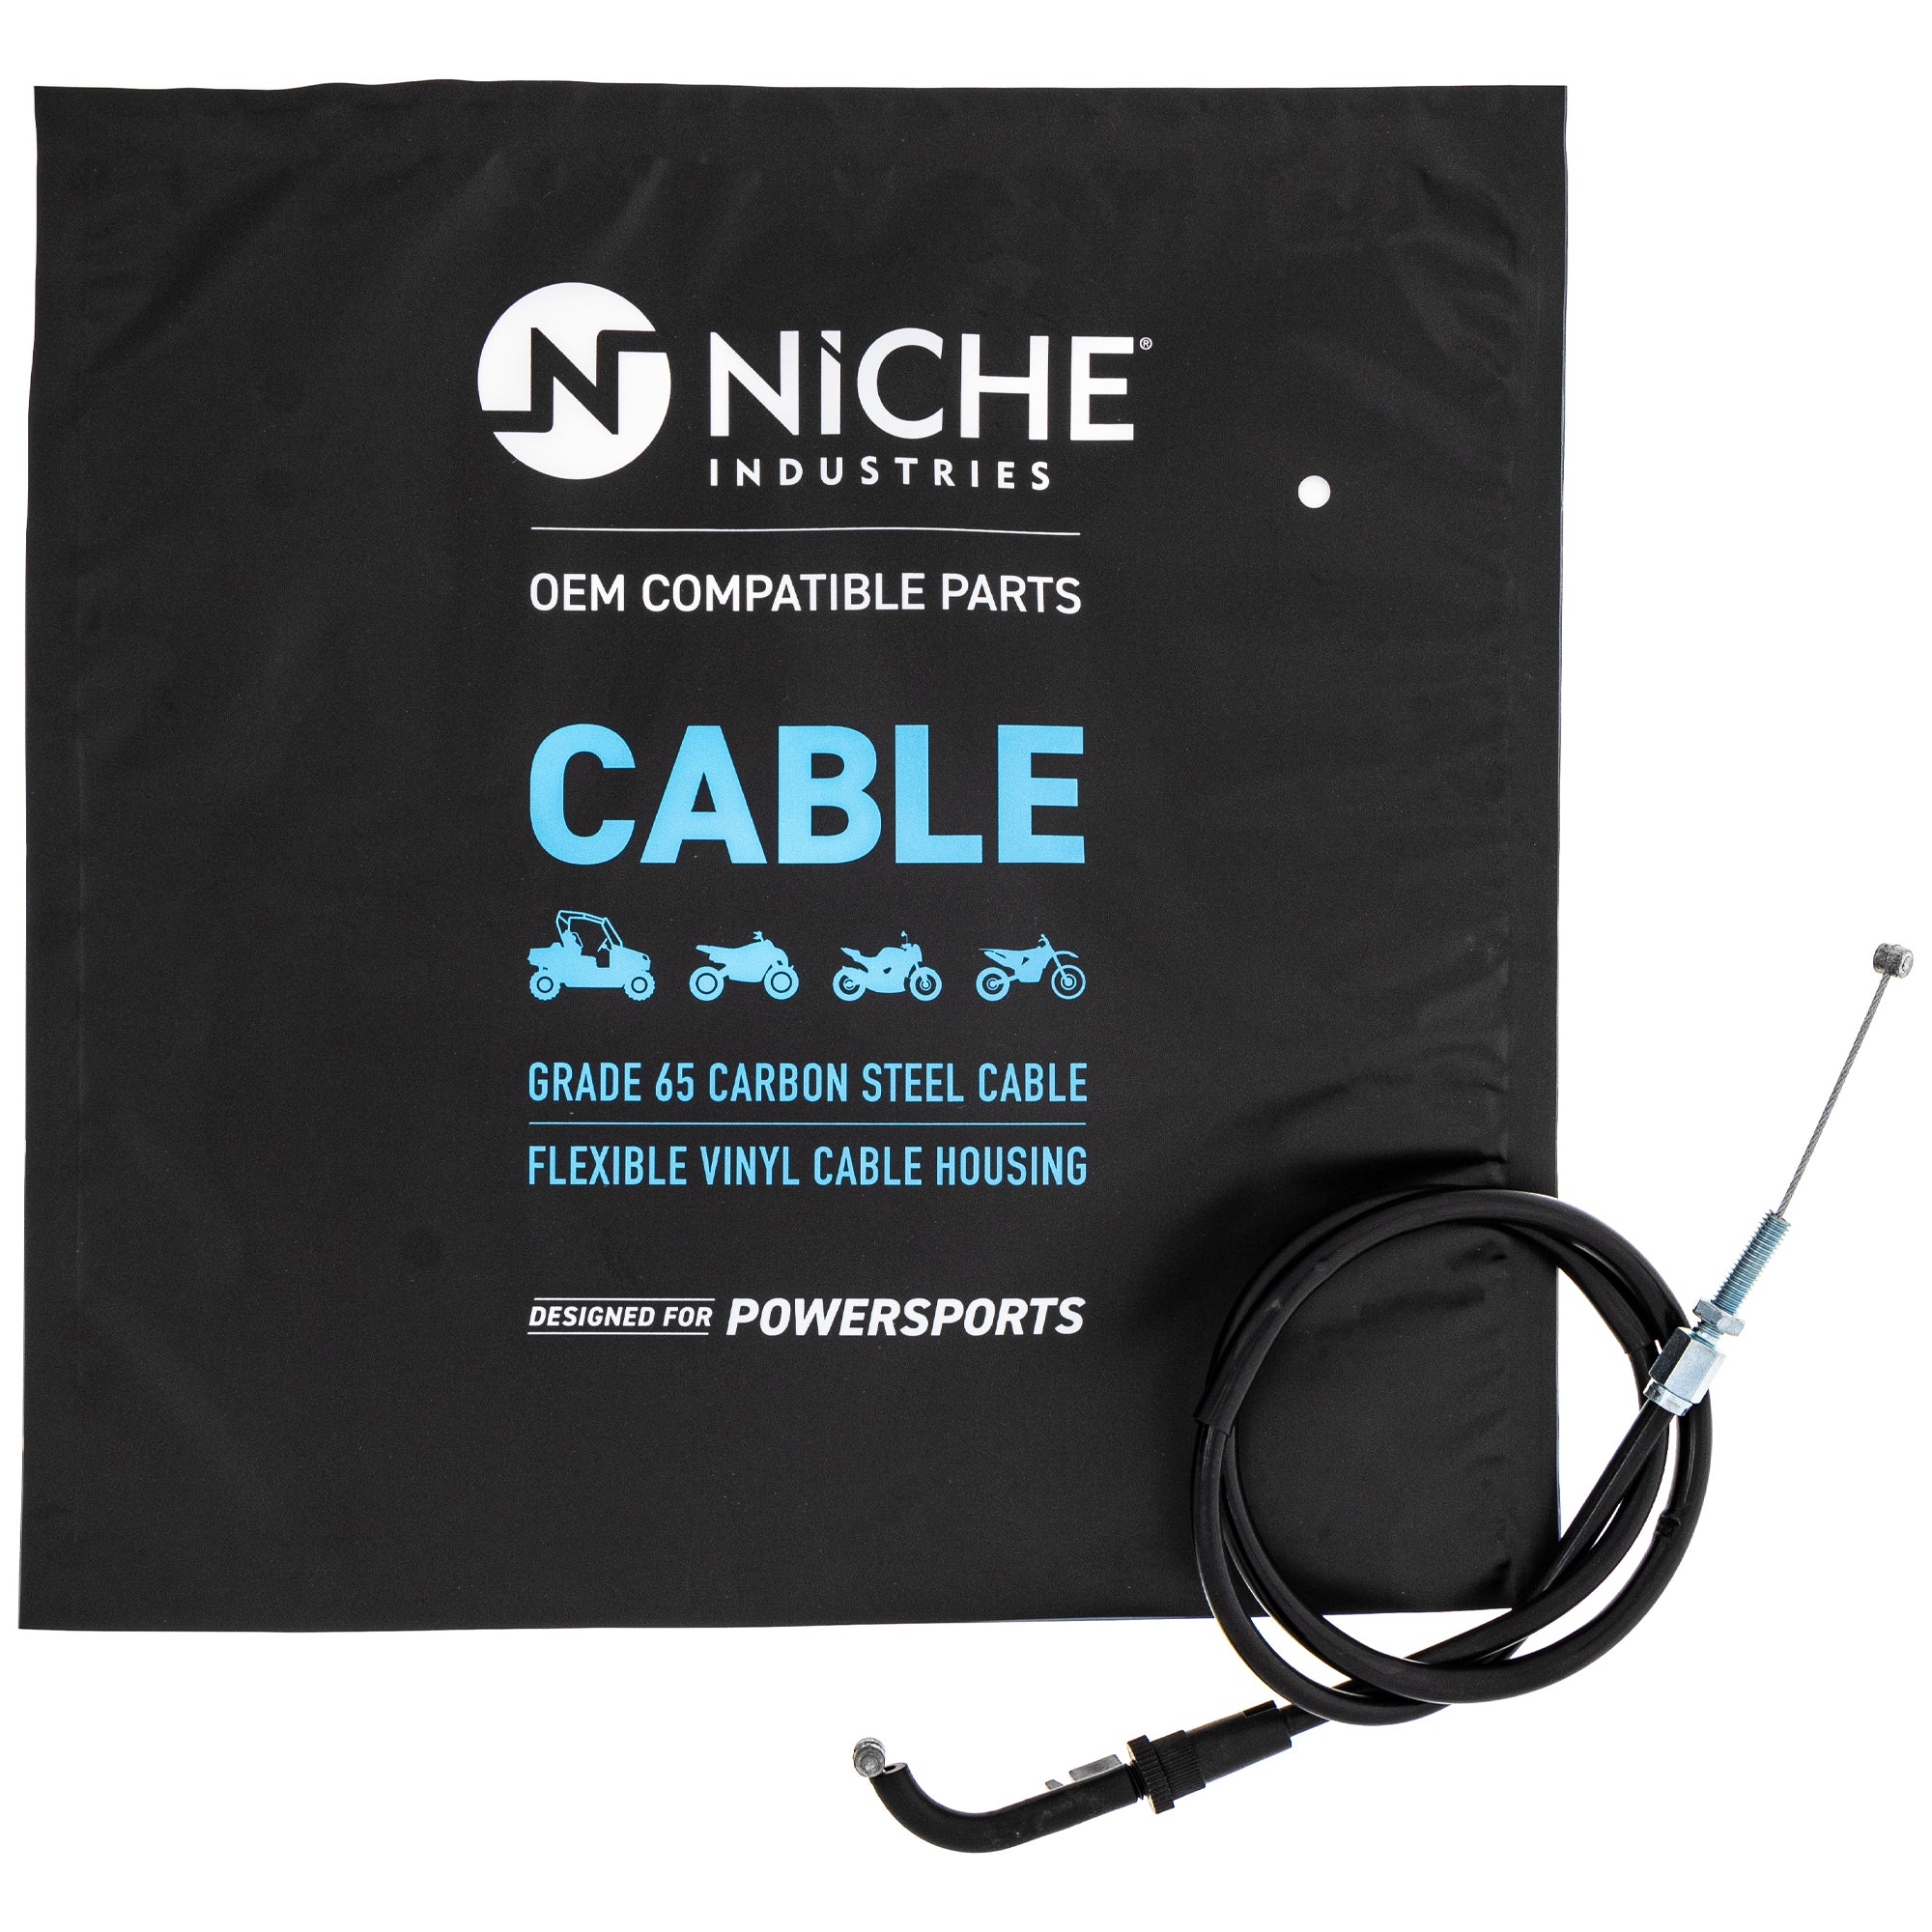 NICHE MK1005908 Throttle Cable Set for zOTHER Ninja